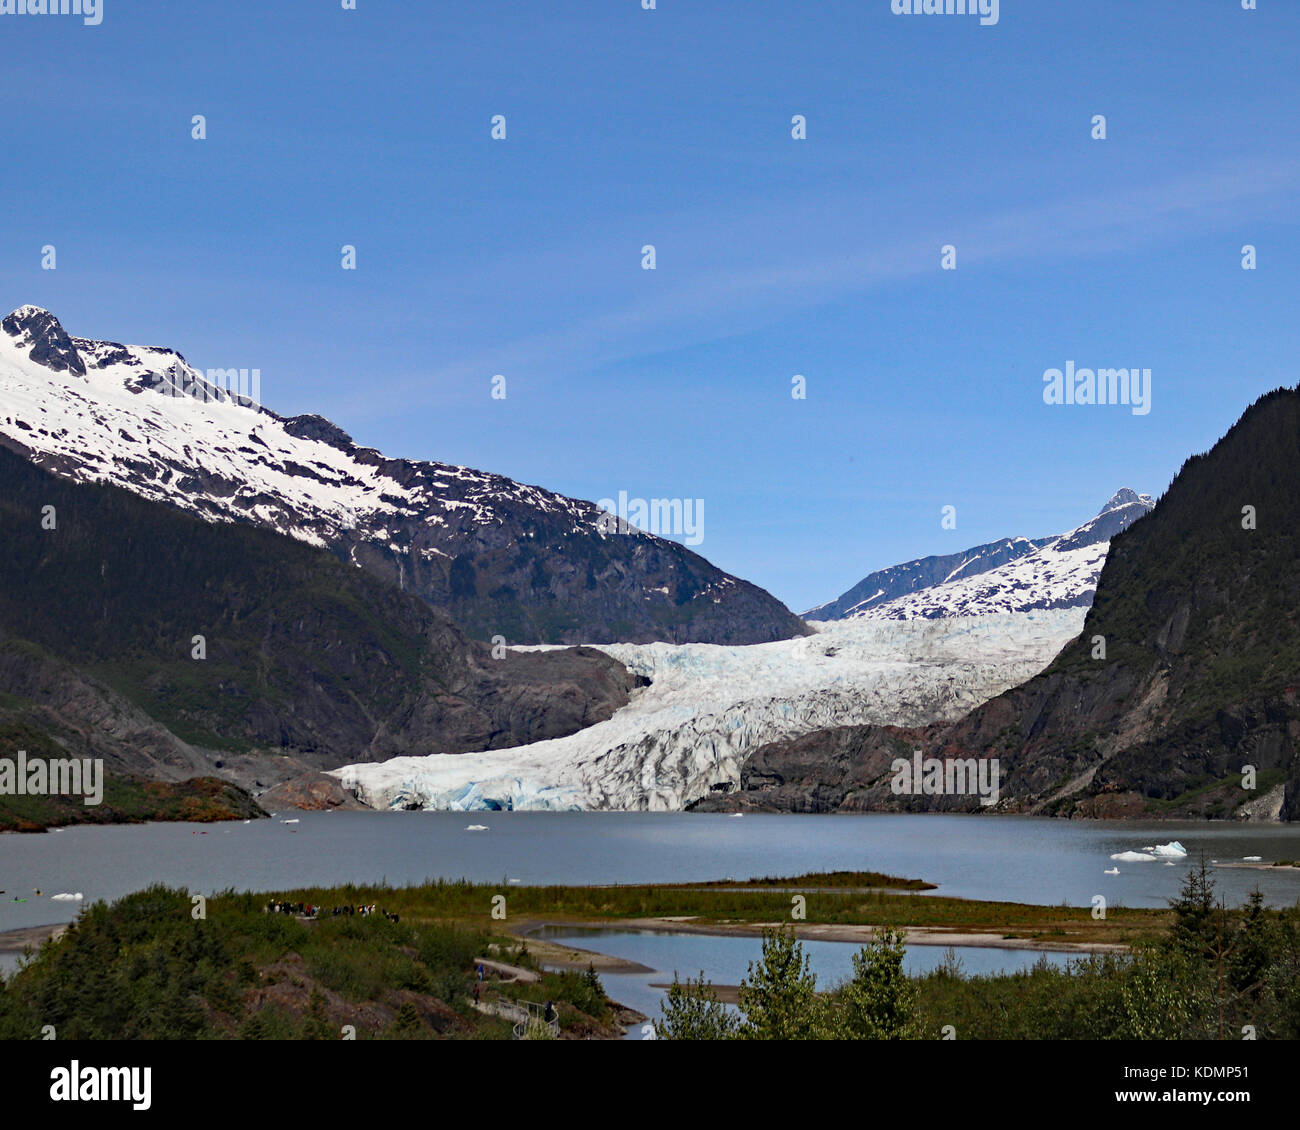 Mendenhall glacier Recreational Area in the Tongass National Forest, Juneau, Alaska Stock Photo